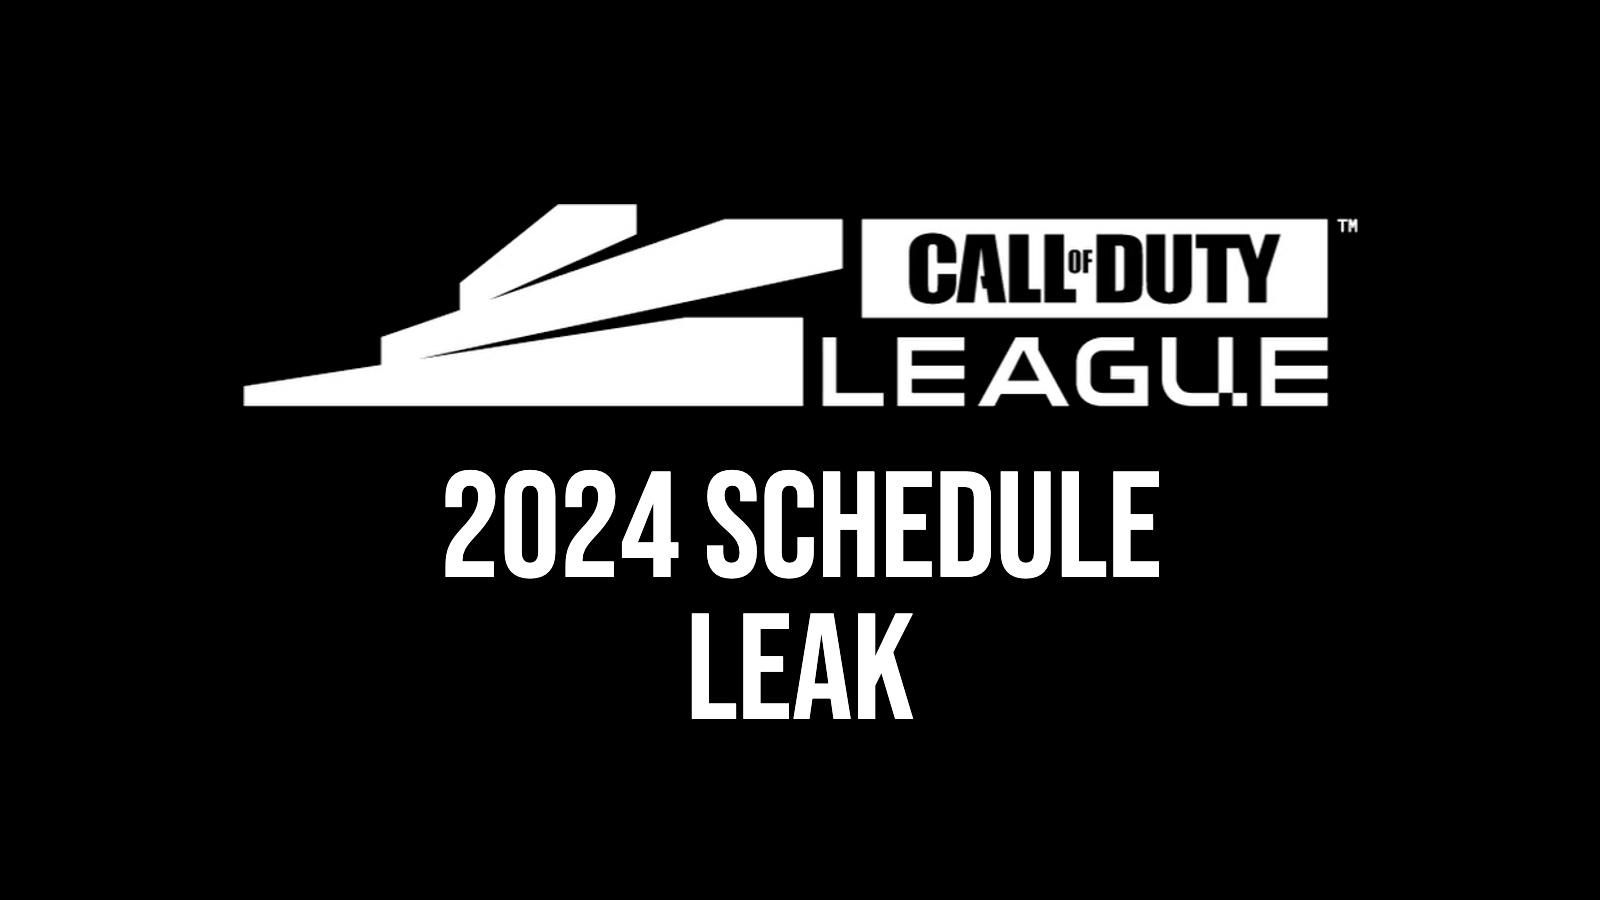 Full Call of Duty League 2024 schedule leaked Dexerto